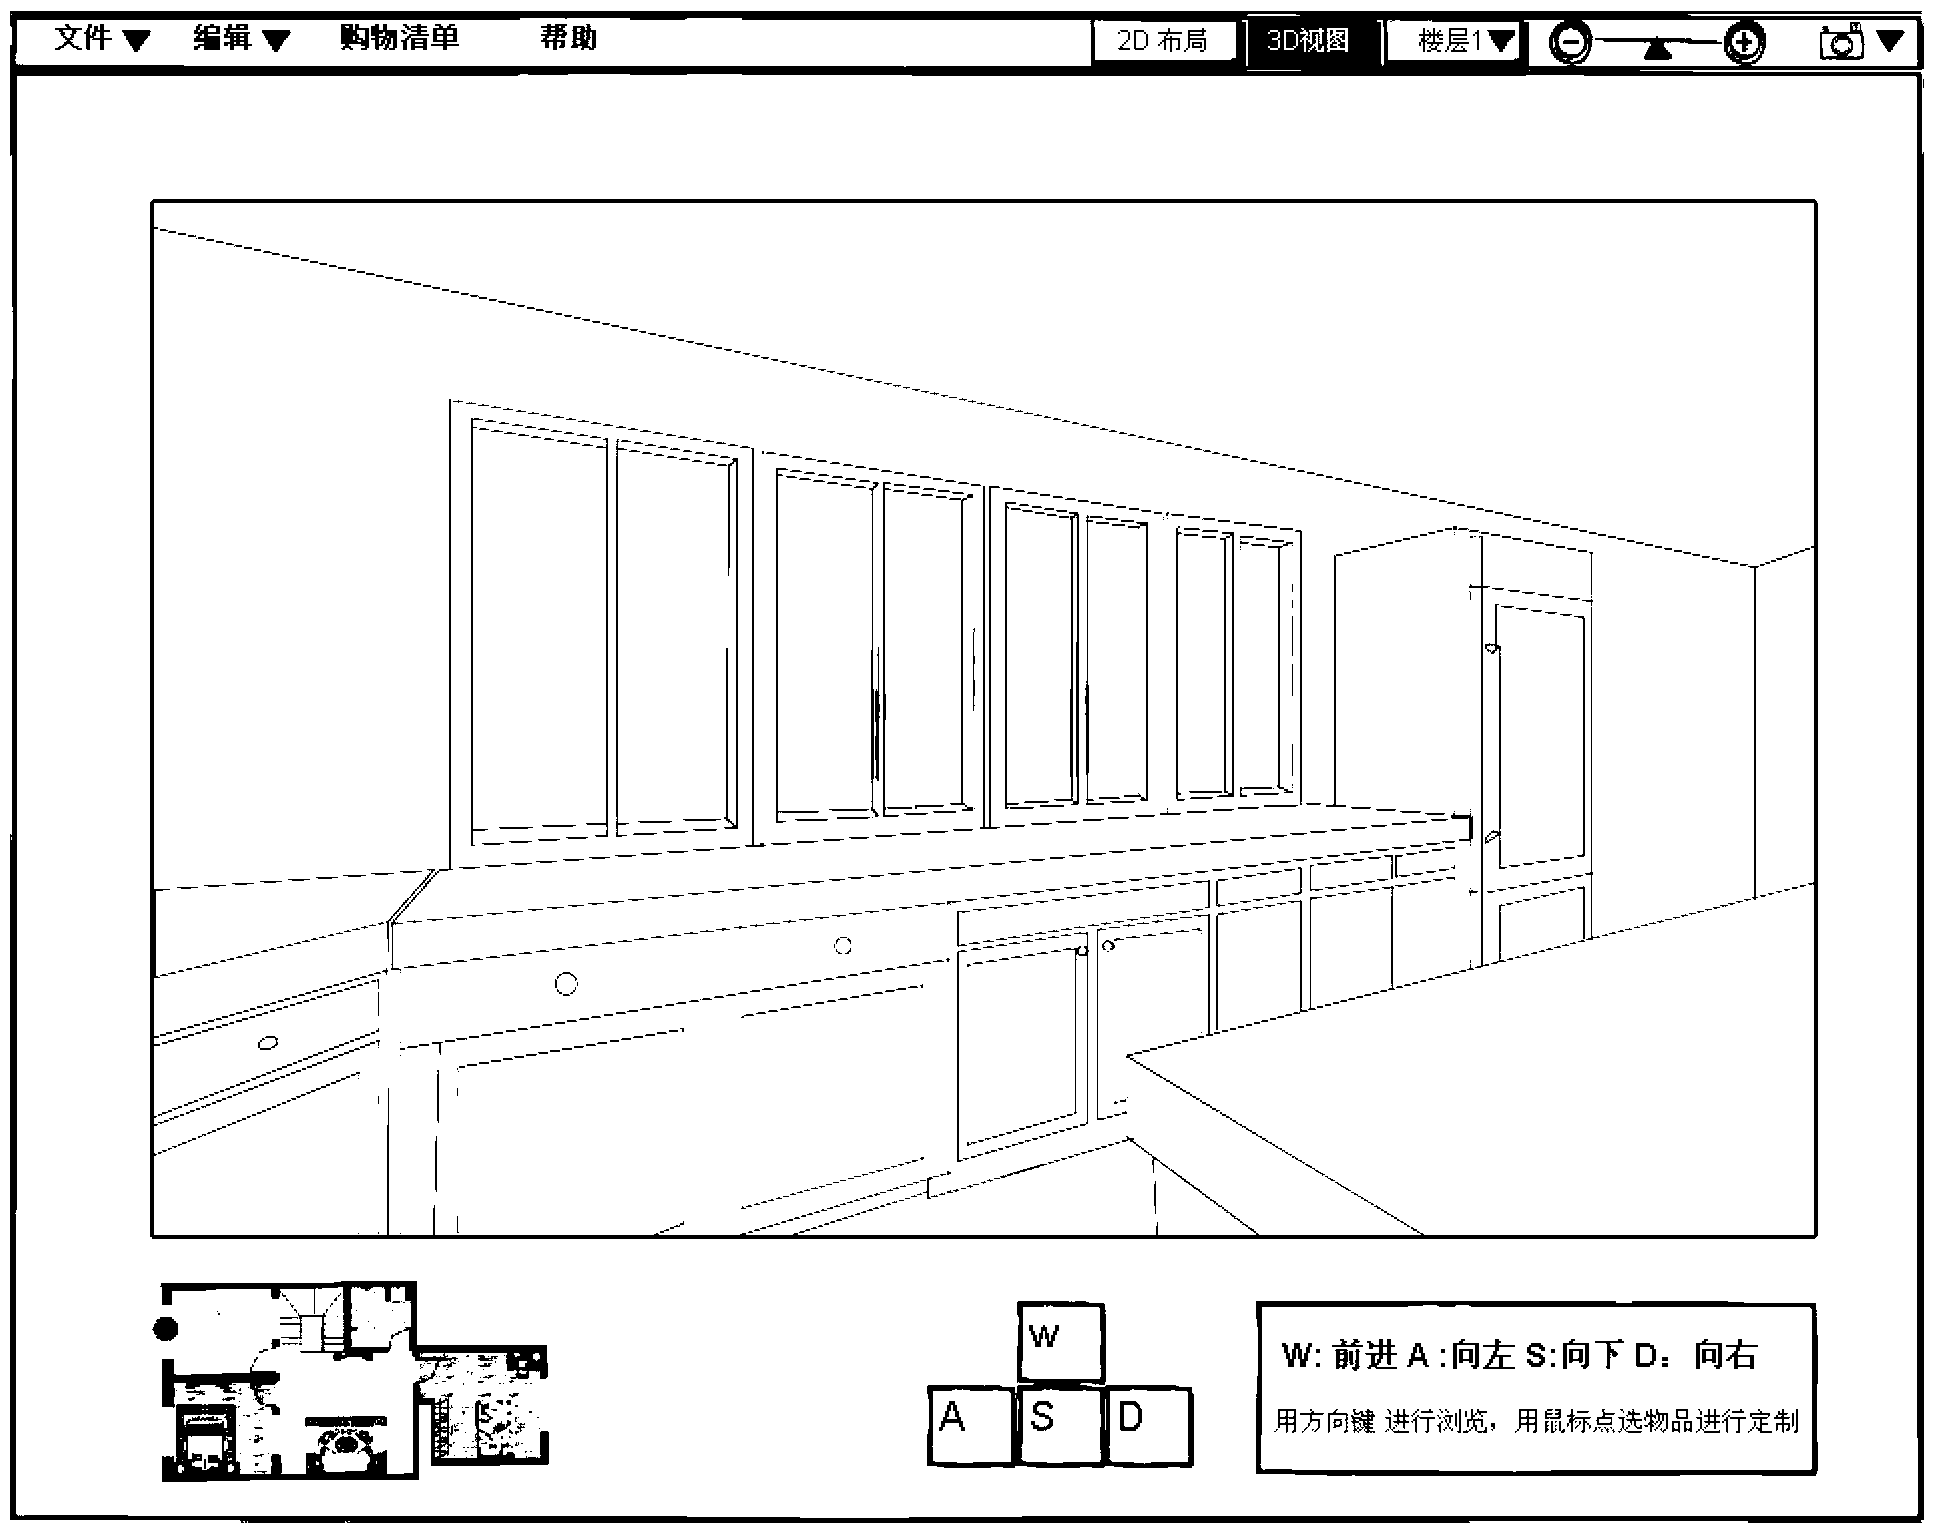 Method for 3D (Three-Dimensional) scene decoration and rendering through webpage